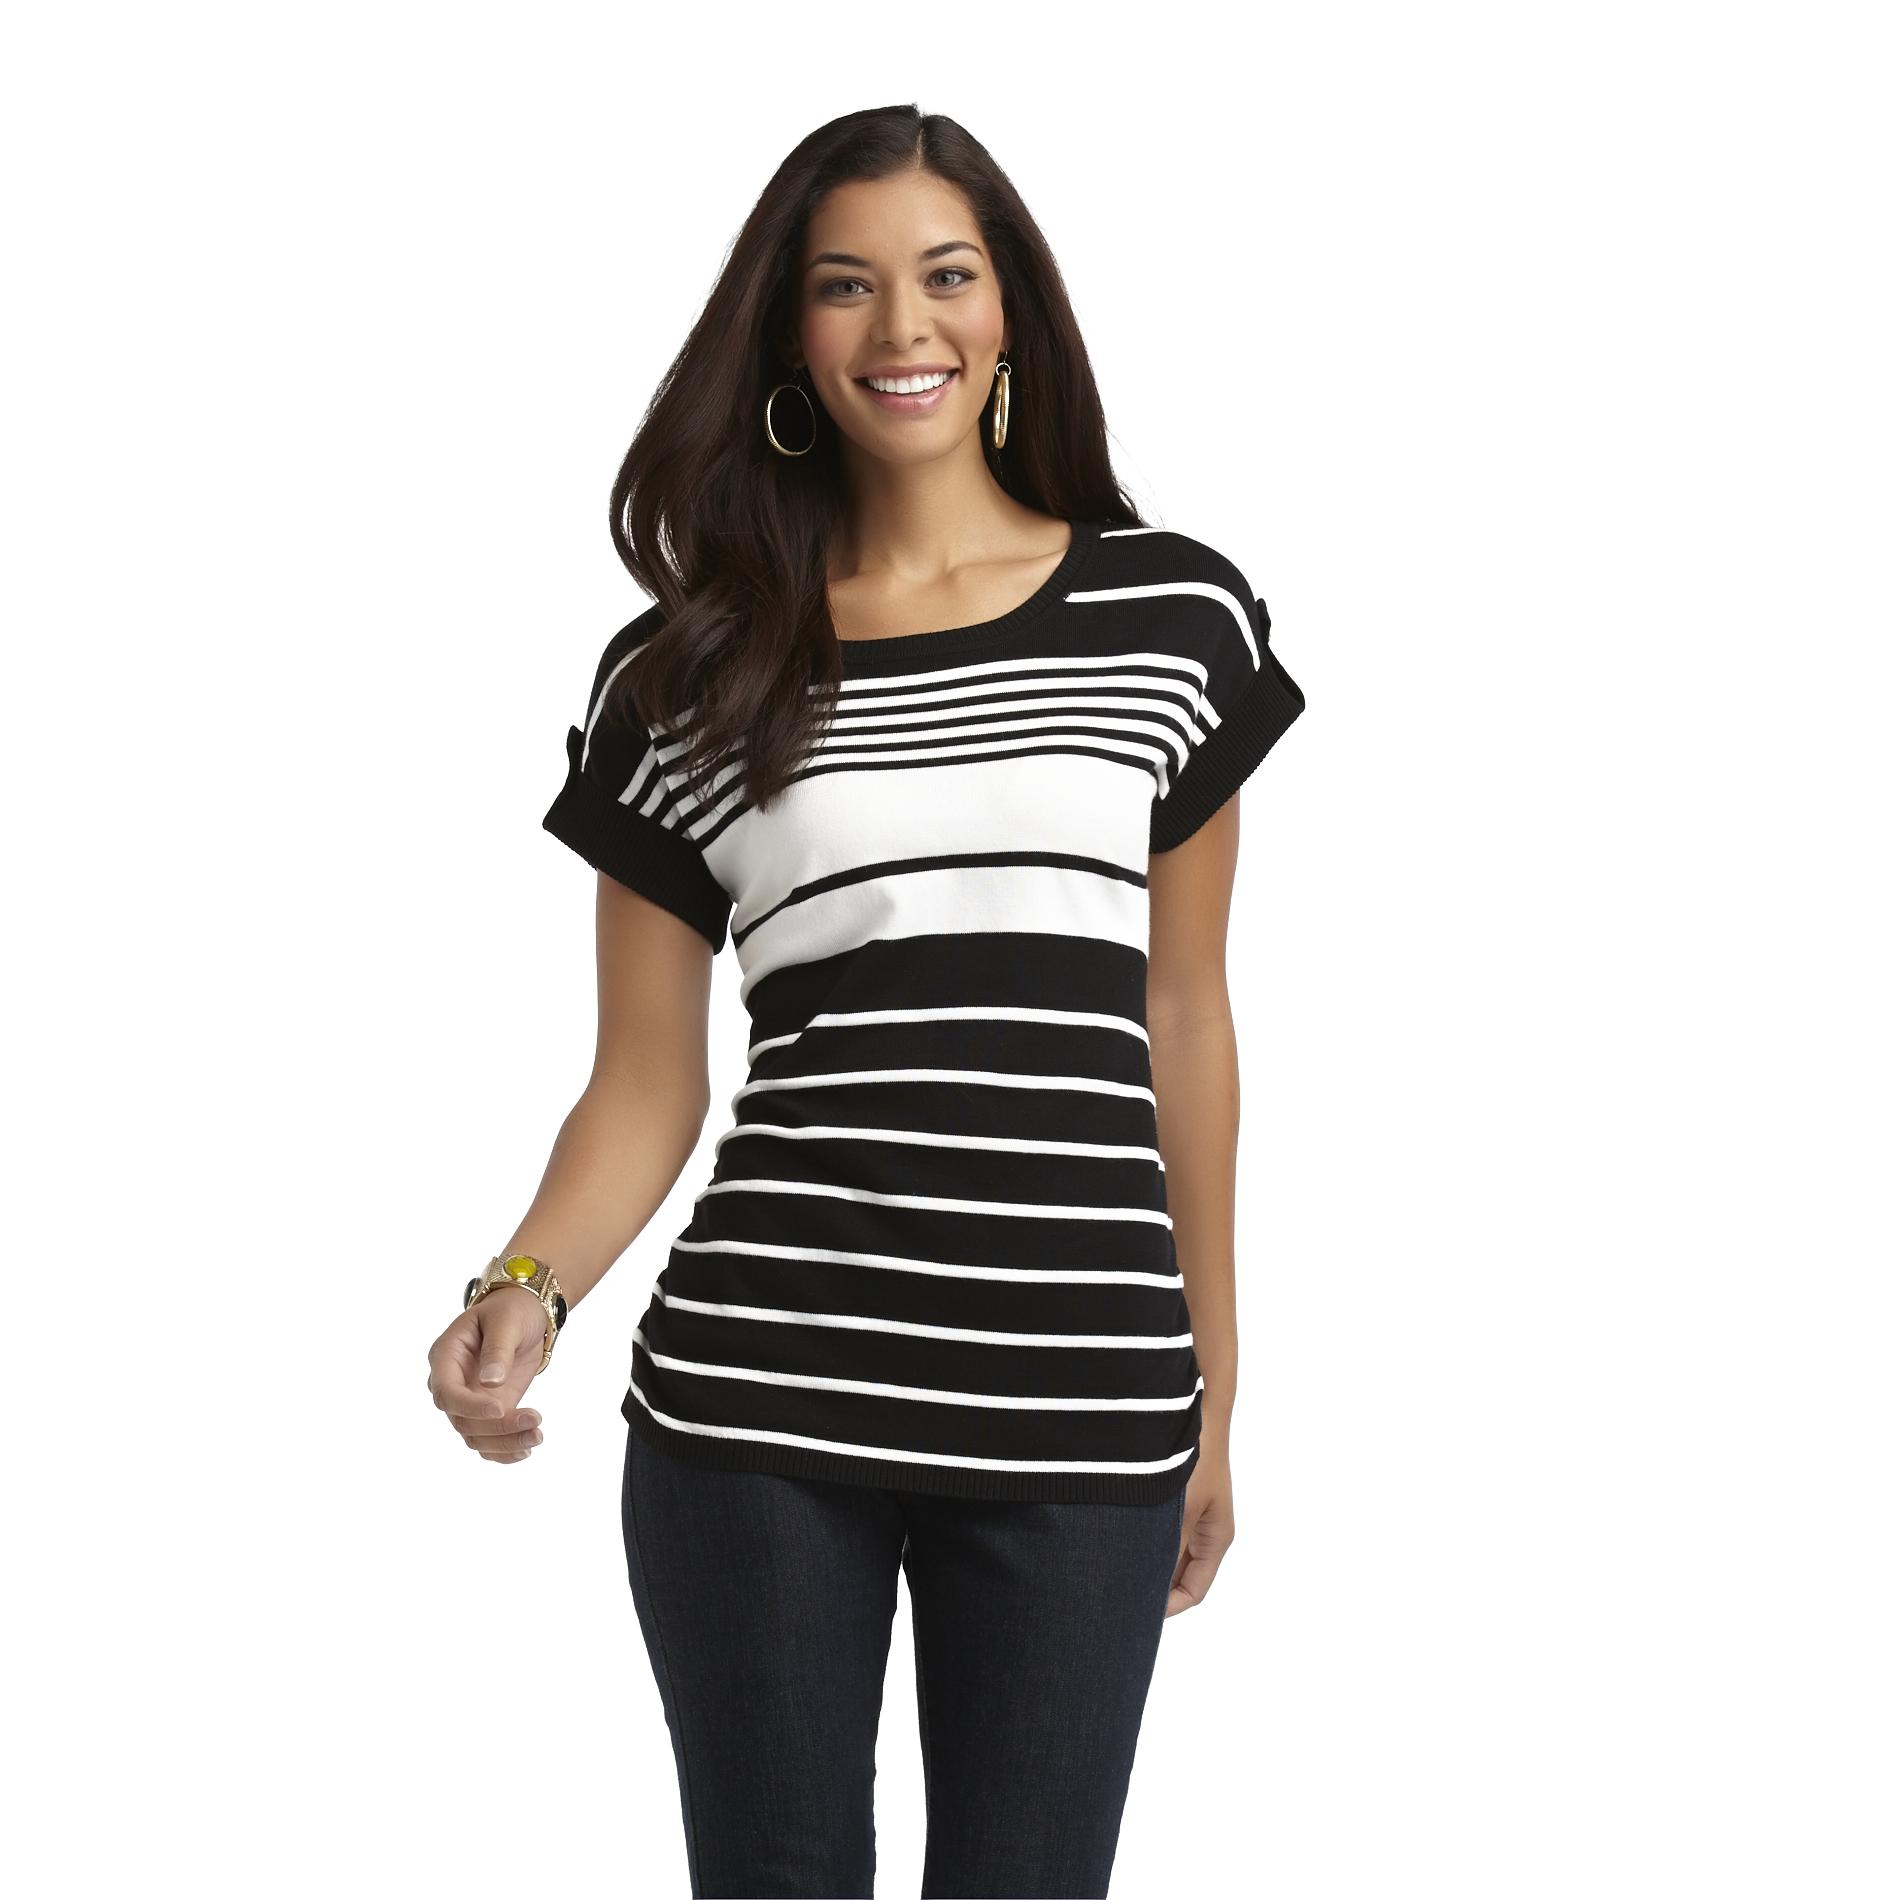 Metaphor Women's Ruched Seam Knit Top - Striped